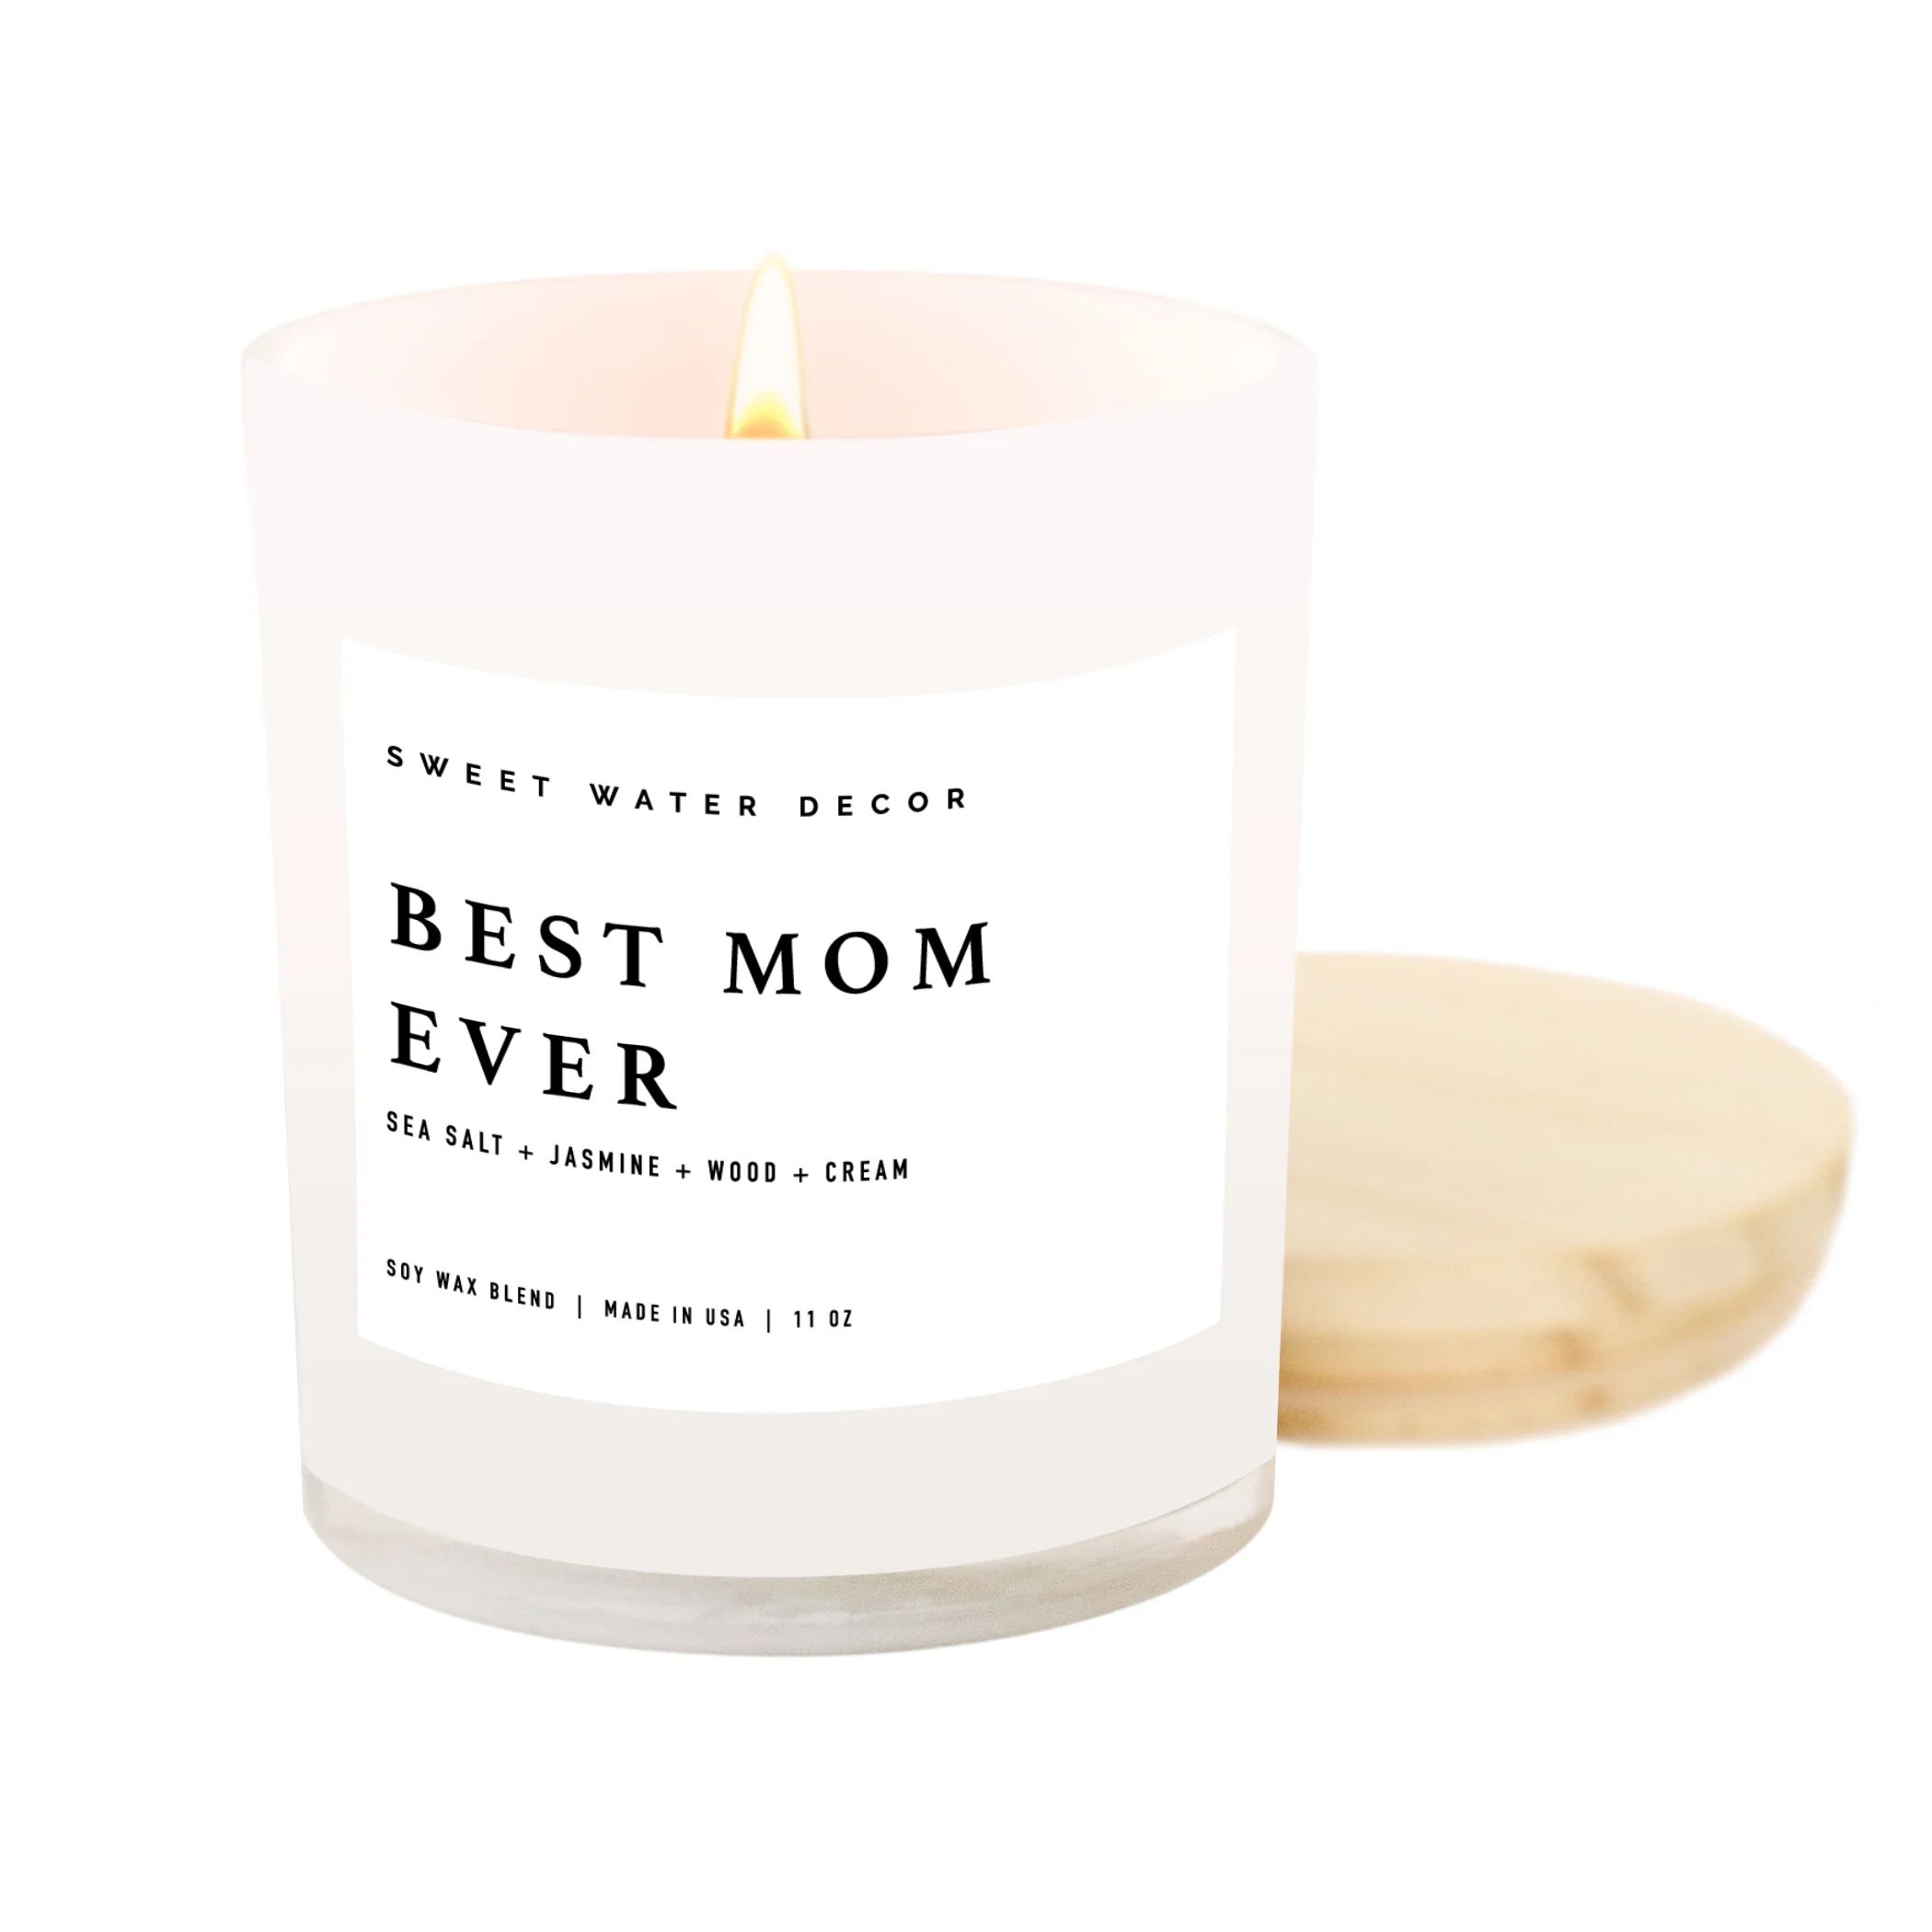 Best Mom Ever! Soy Candle | White Jar + Wood Lid | Sweet Water Decor, LLC